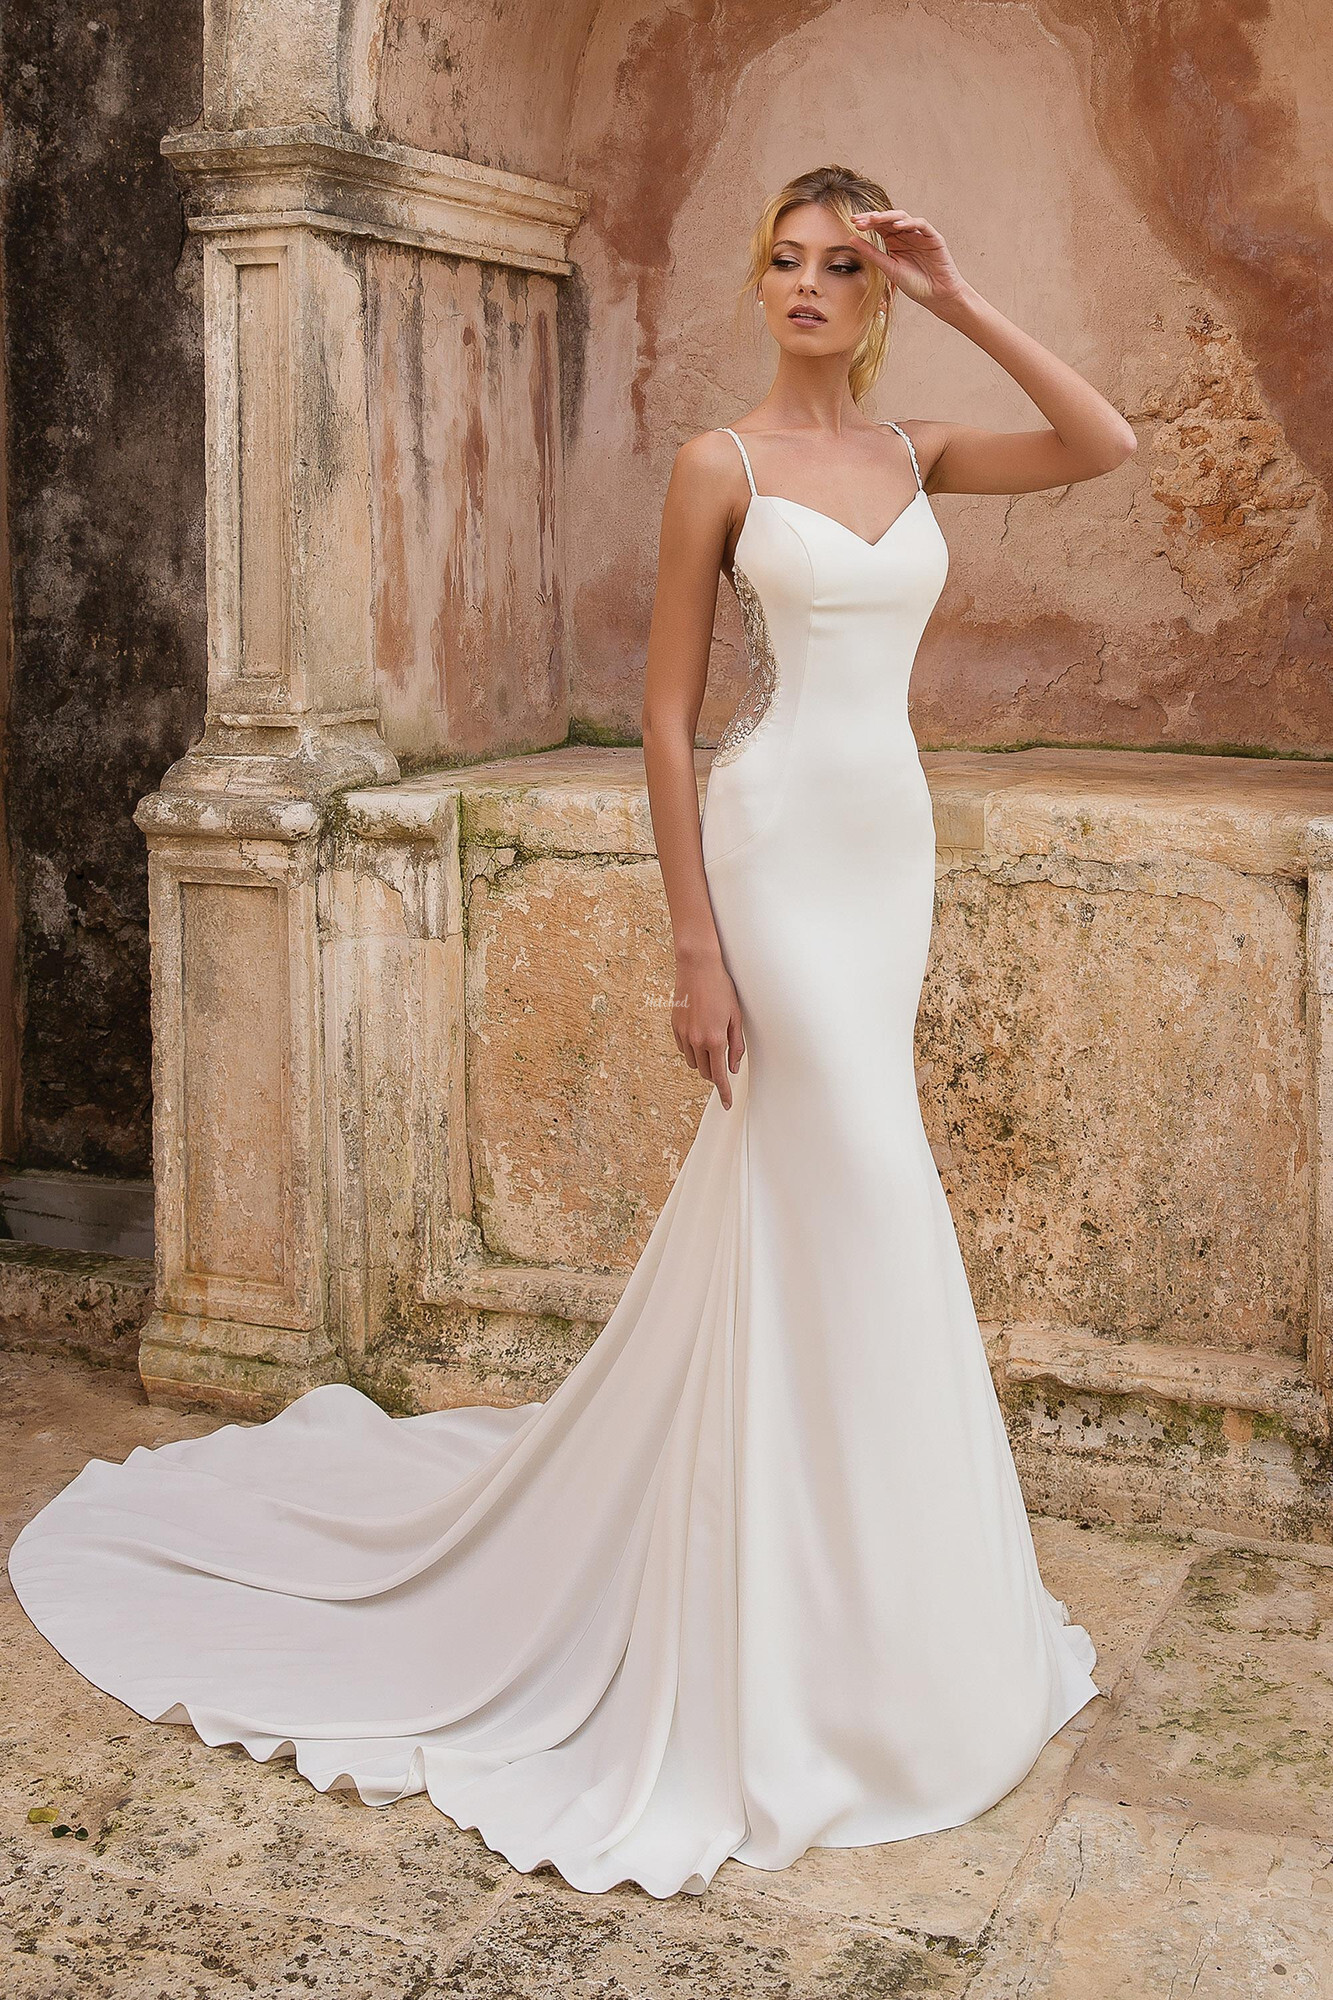 Backless Wedding Dresses & Bridal Gowns - Page 3 | hitched.co.uk